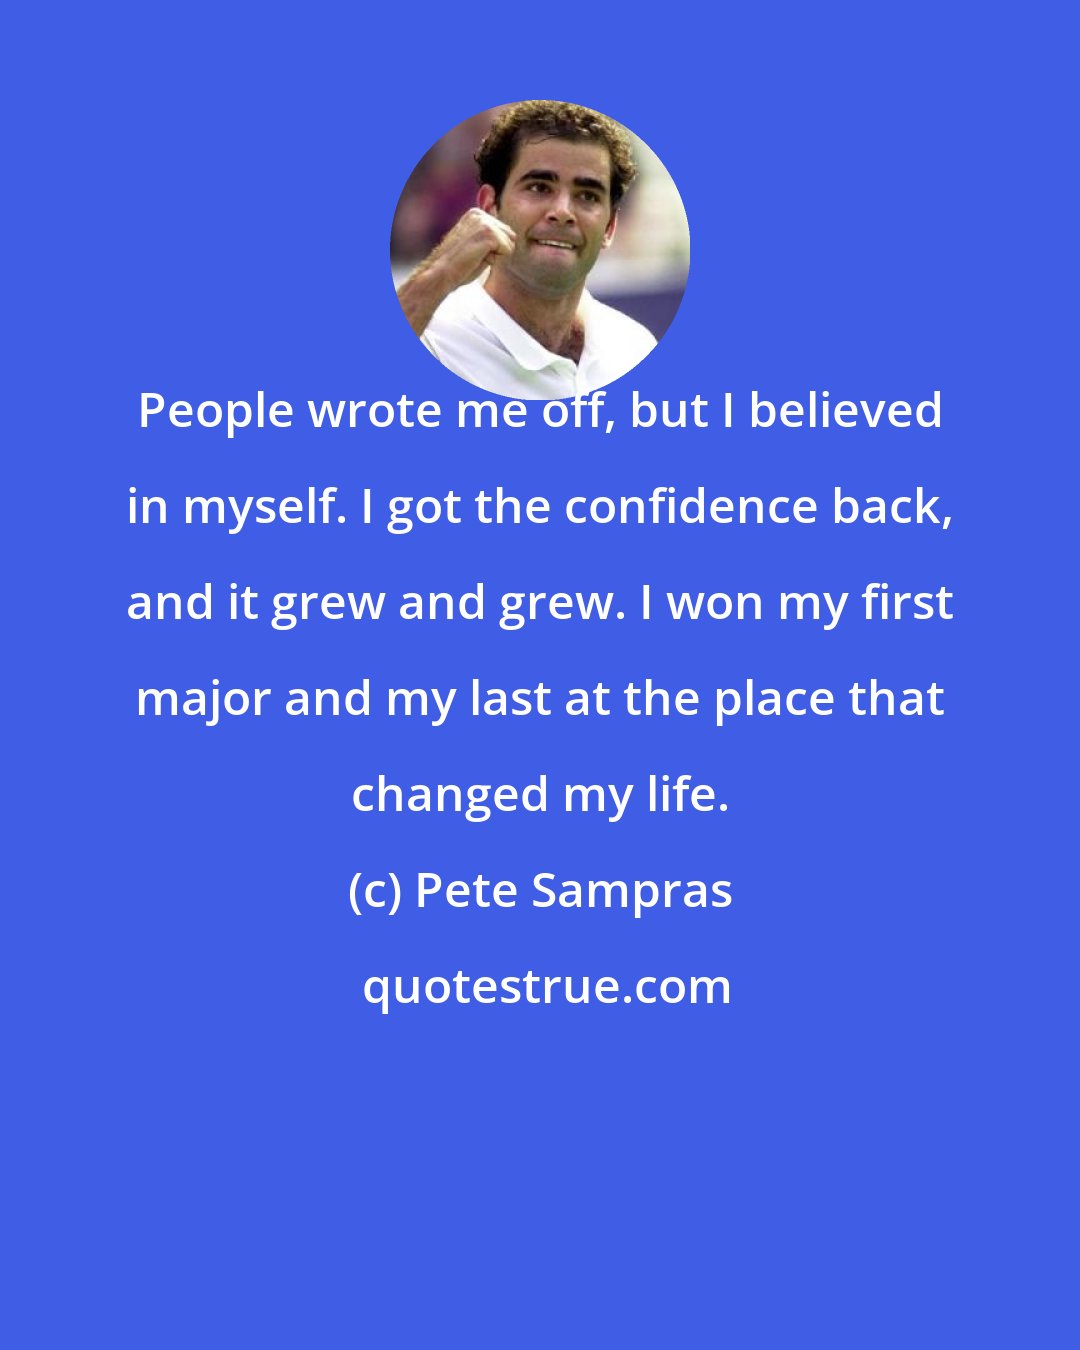 Pete Sampras: People wrote me off, but I believed in myself. I got the confidence back, and it grew and grew. I won my first major and my last at the place that changed my life.